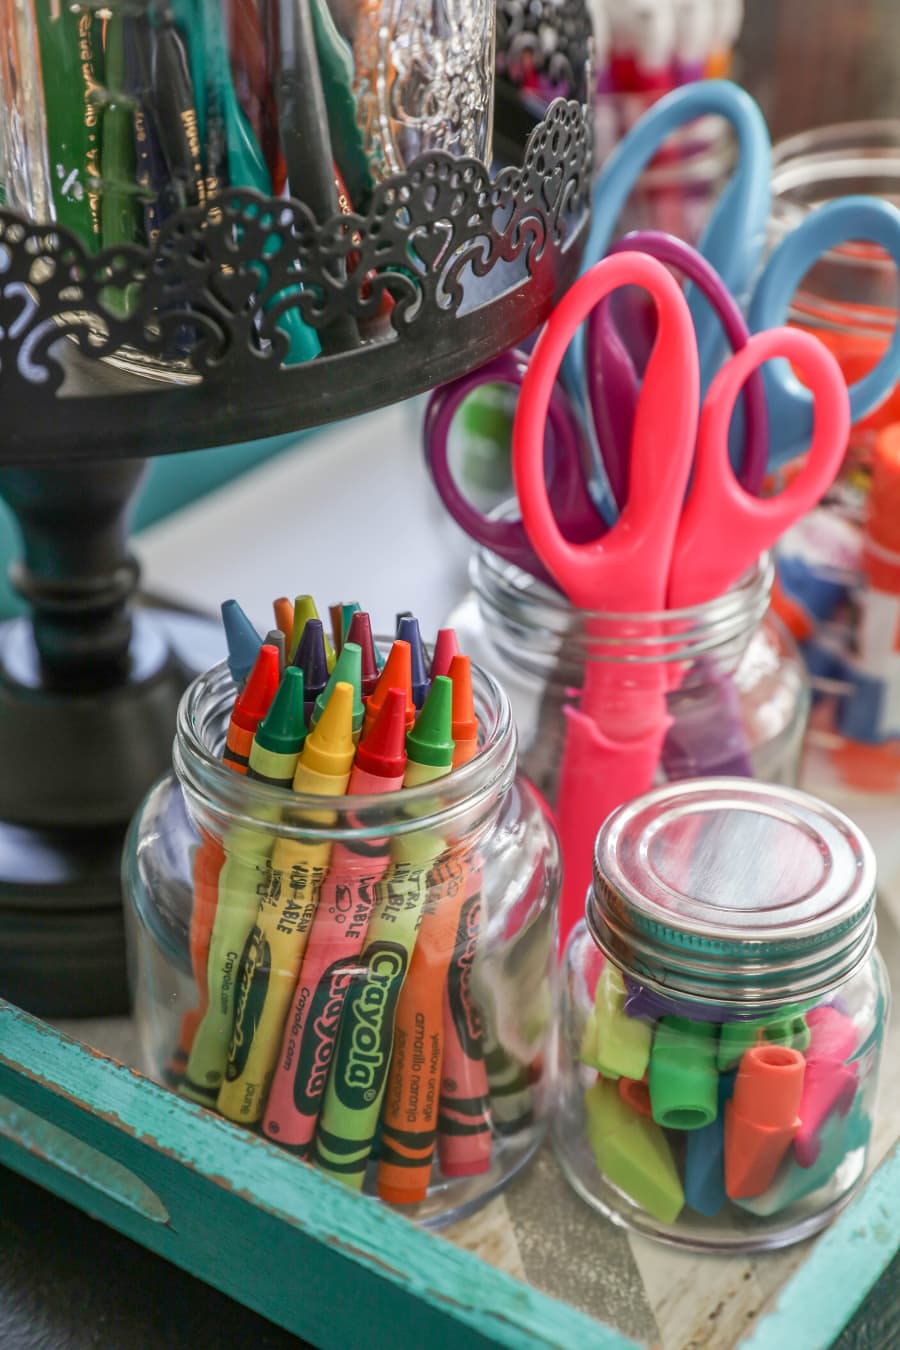 DIY Homework Station - a place for all the supplies to help the kids get homework done more efficiently and more stress-free PLUS more Back 2 School tips!